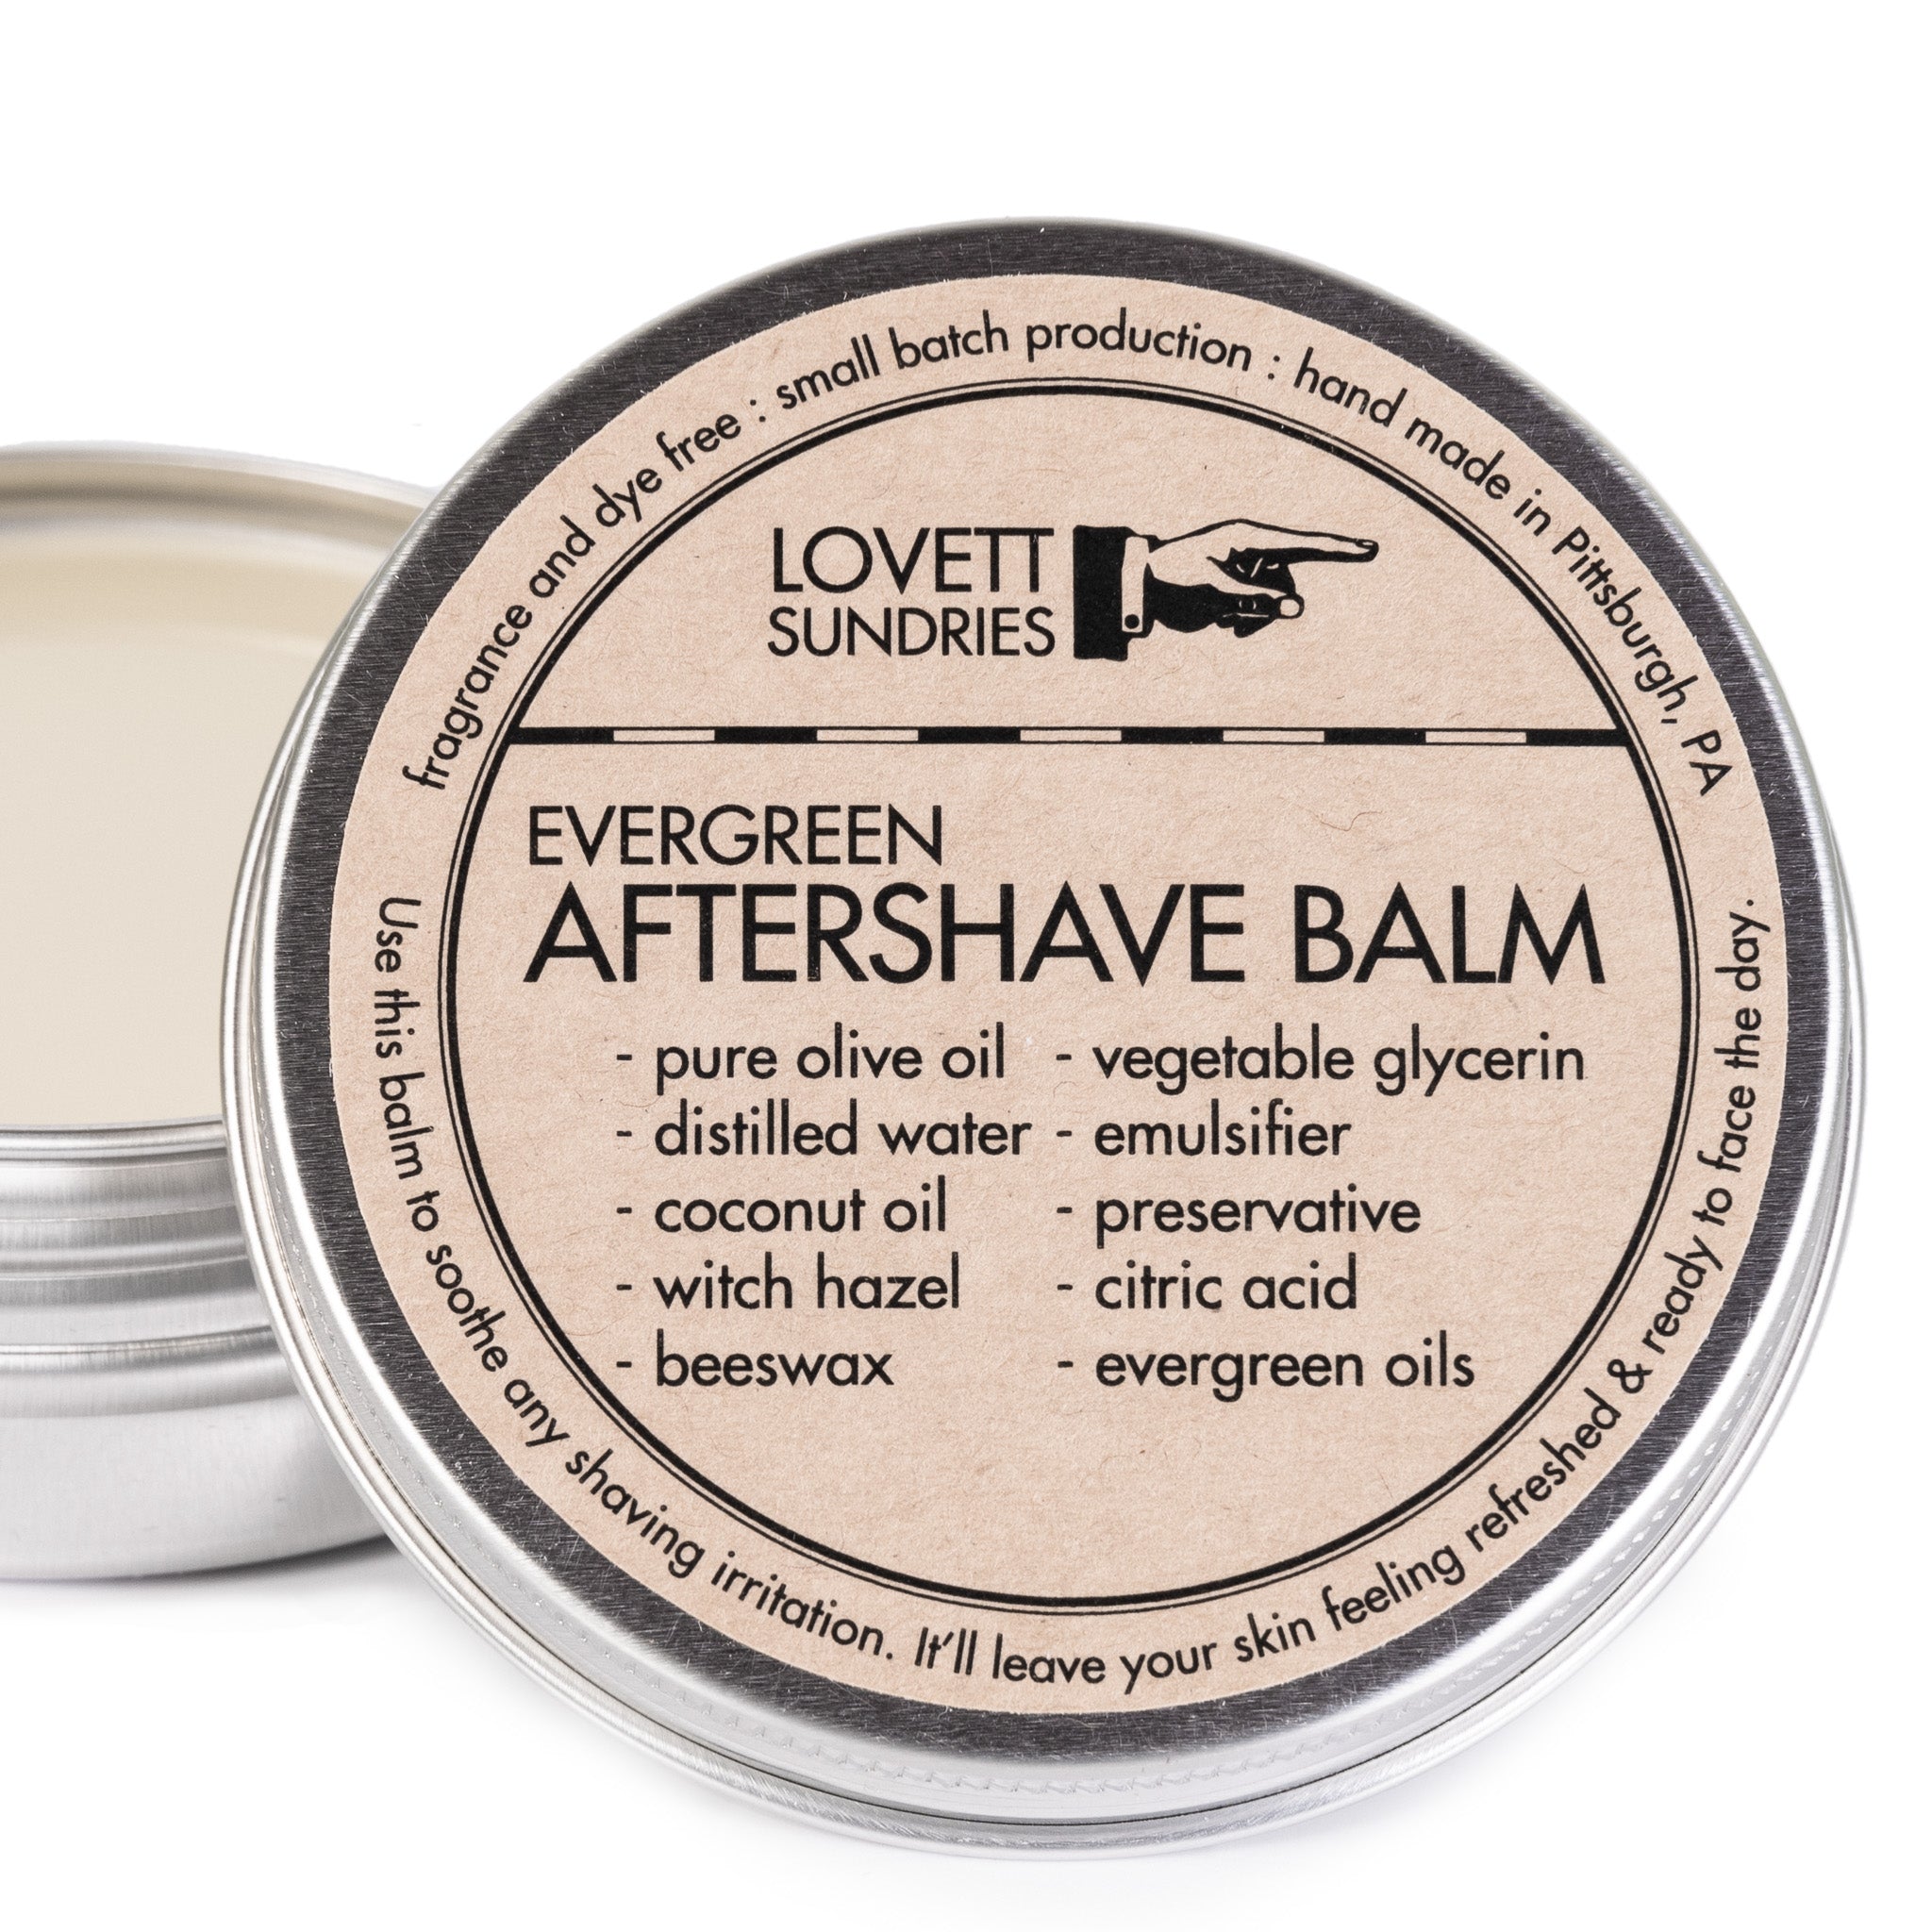 all-natural Lovett Sundries' evergreen aftershave balm.